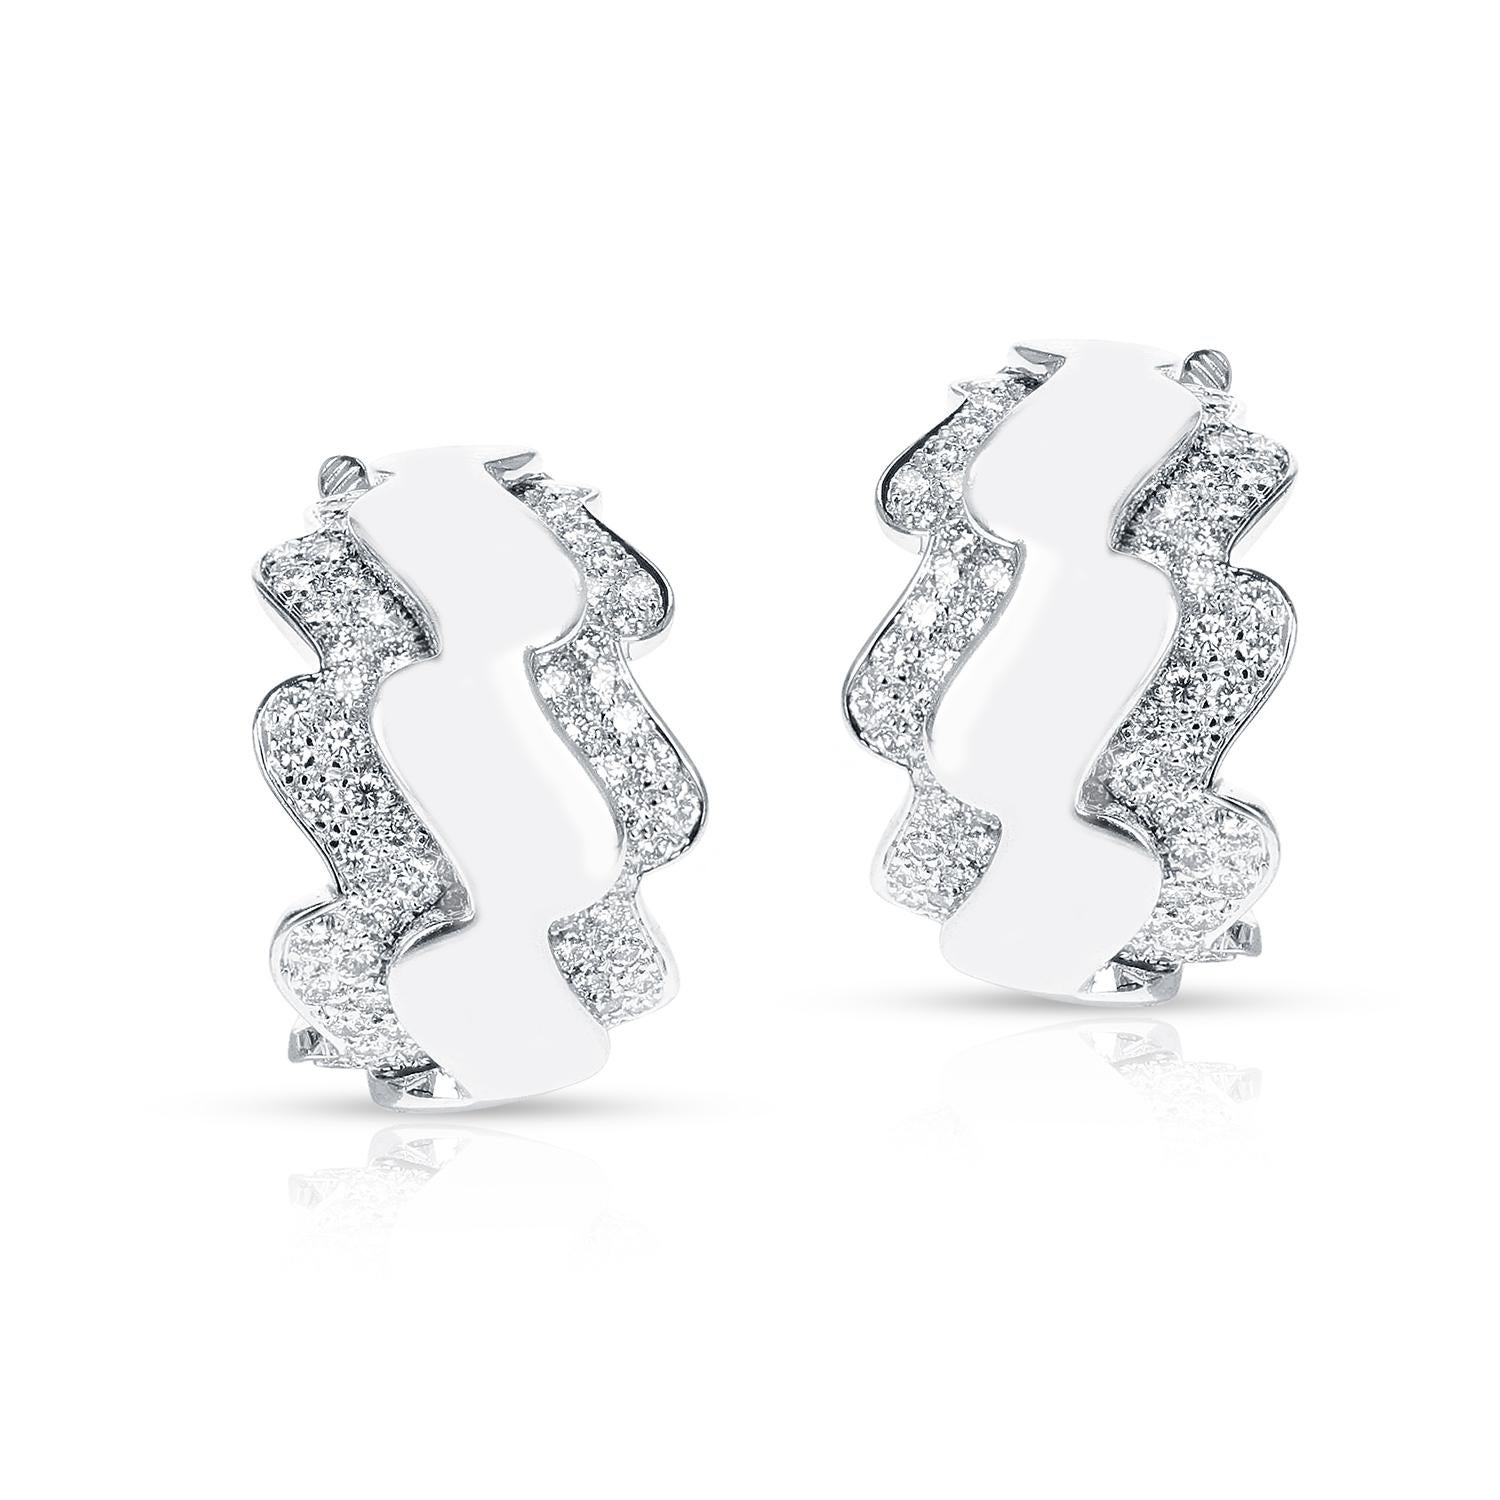 A pair of French Van Cleef & Arpels Wave-Style Earrings made in 18 Karat White Gold with Diamonds. The total weight of the earring is 25.16 grams.
The length is 0.80 inches.